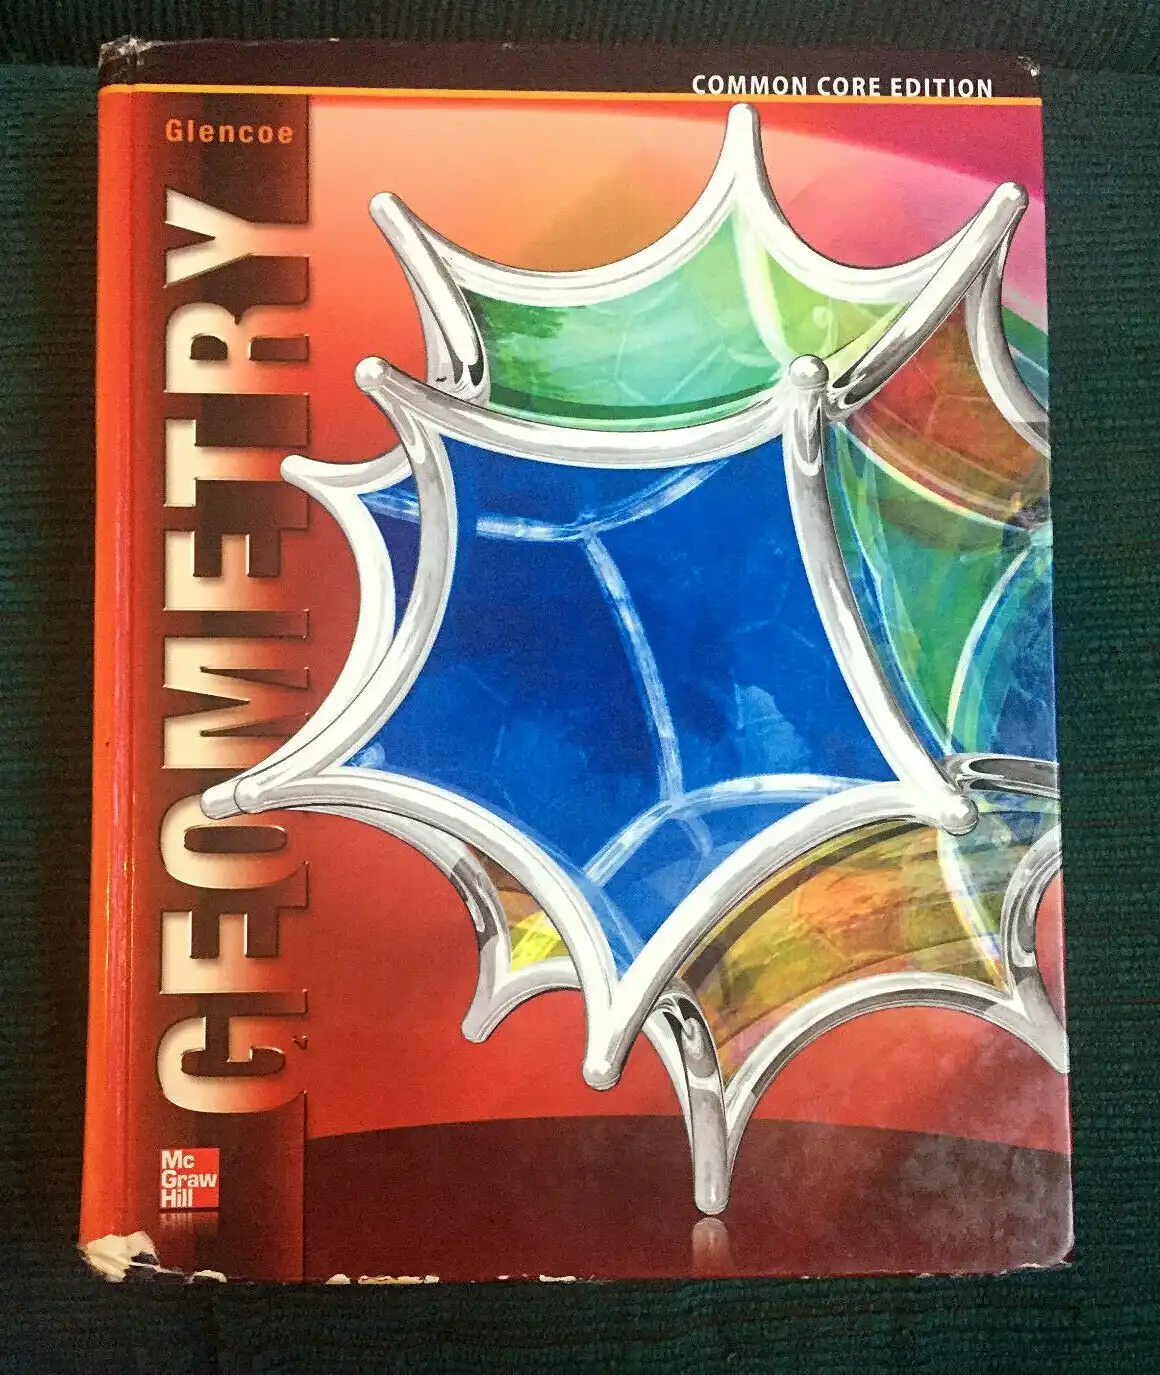 Geometry Student Edition by McGraw Hill Glenco Used ...